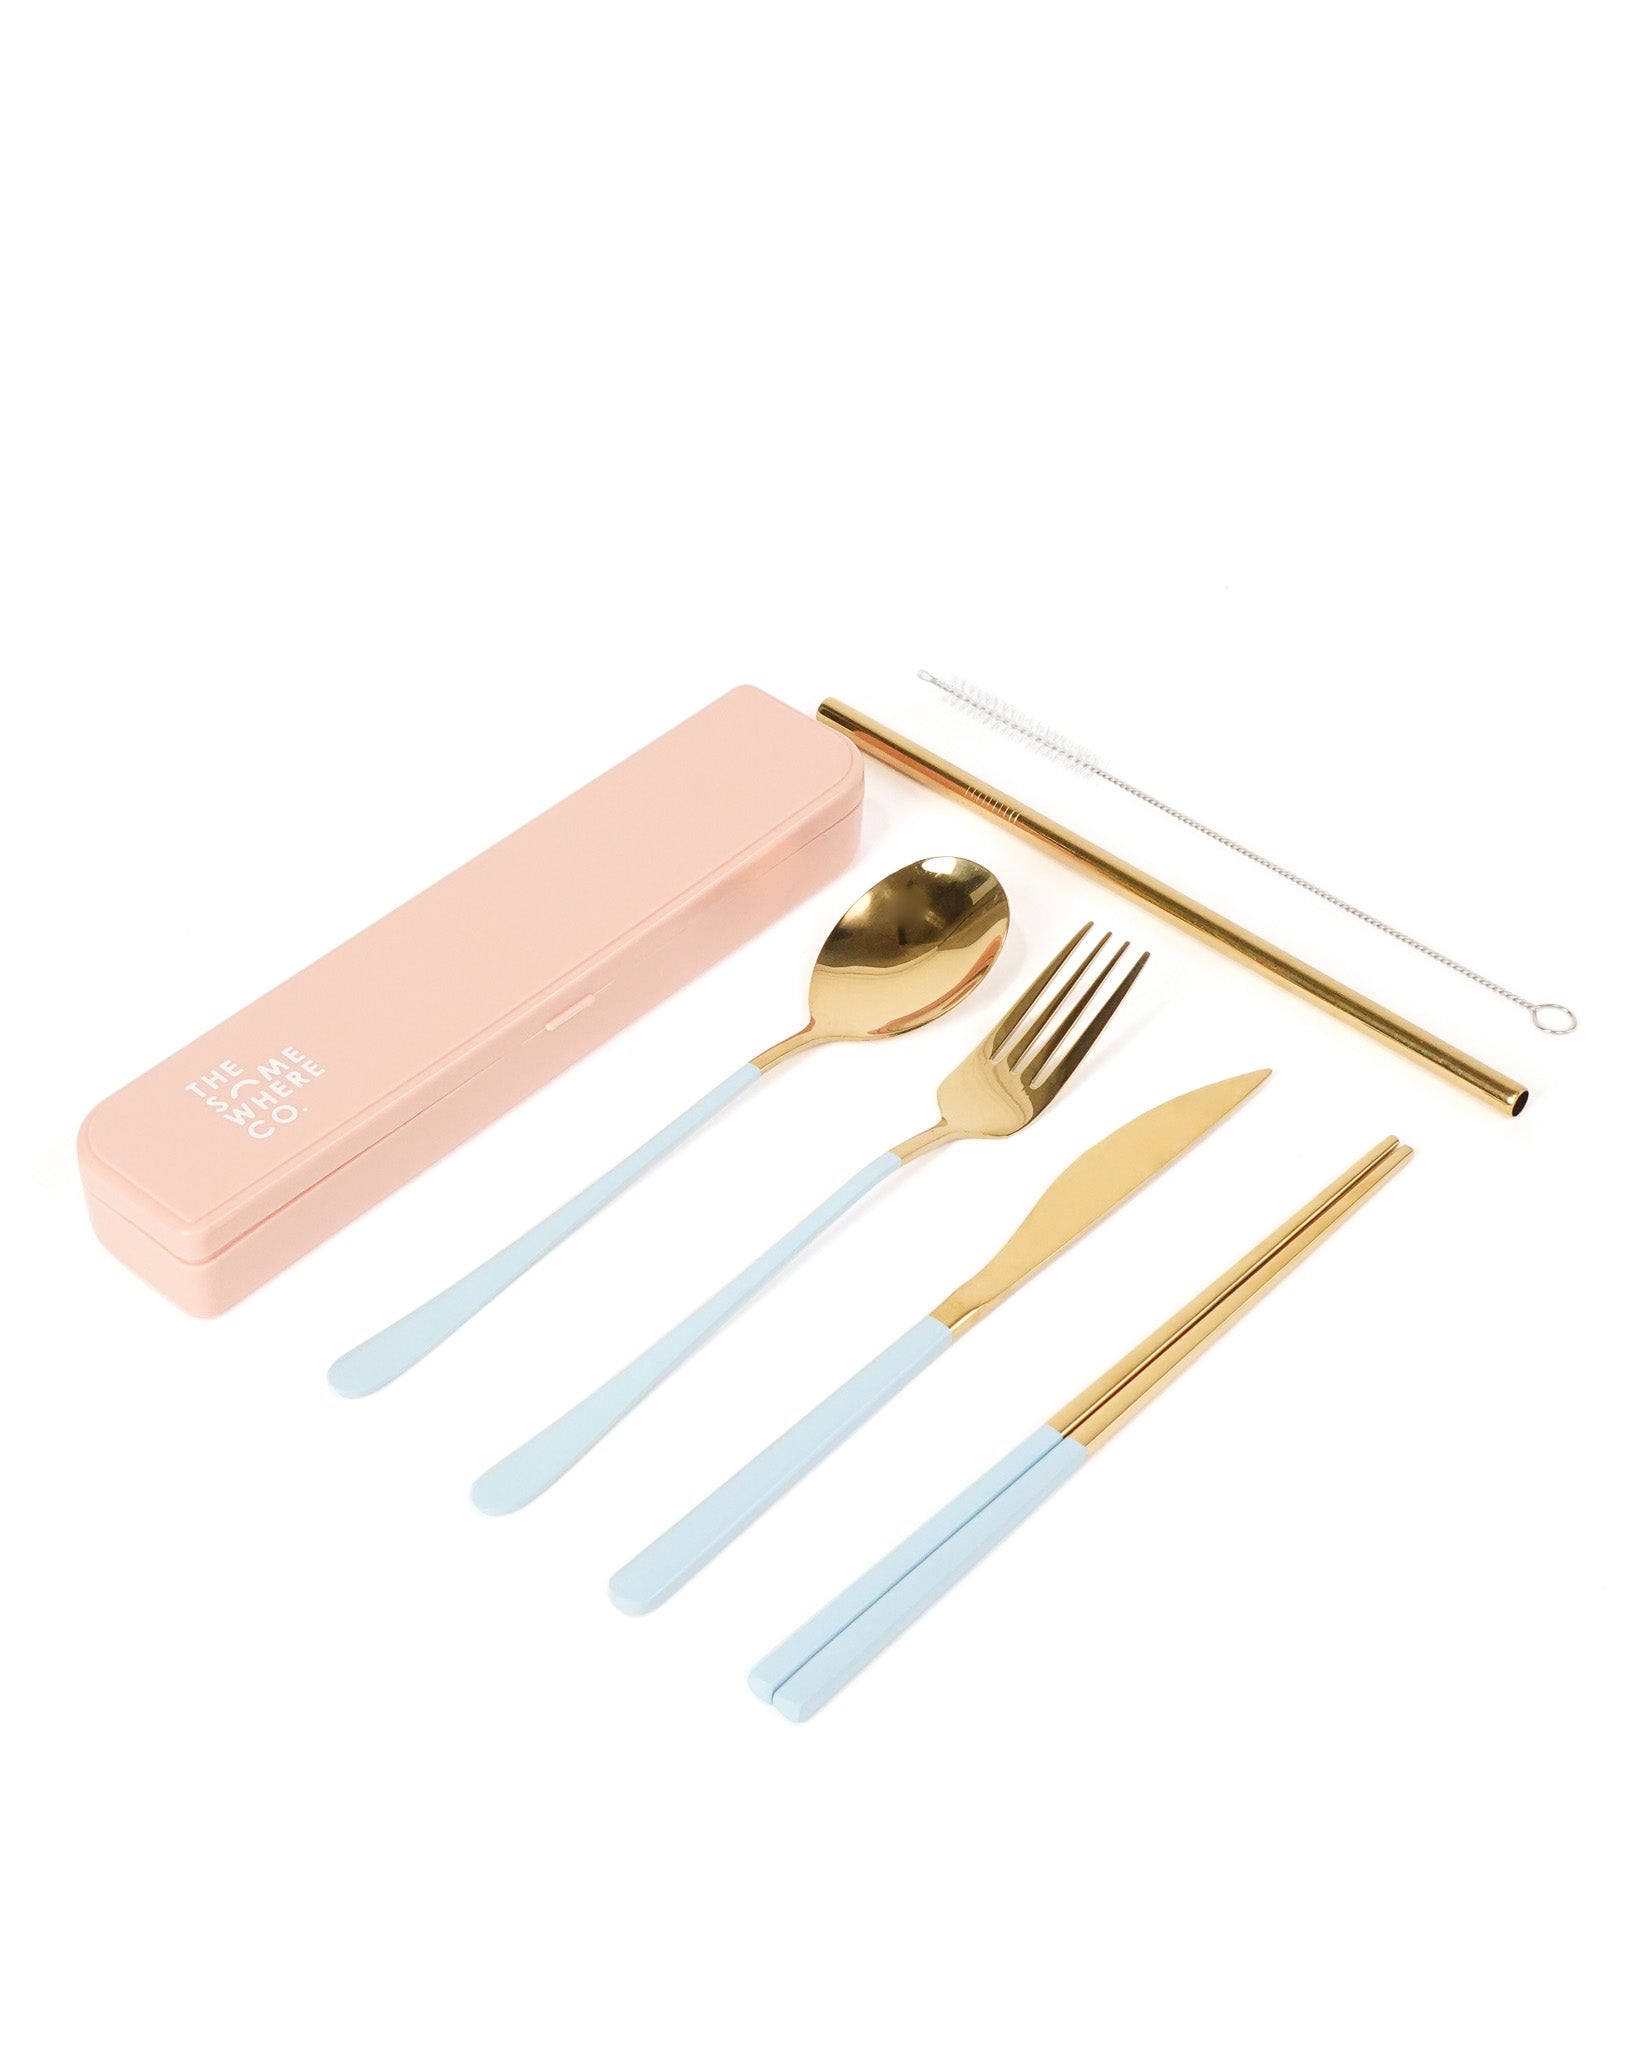 Take Me Away Cutlery Kit - Gold with Powder Blue Handle